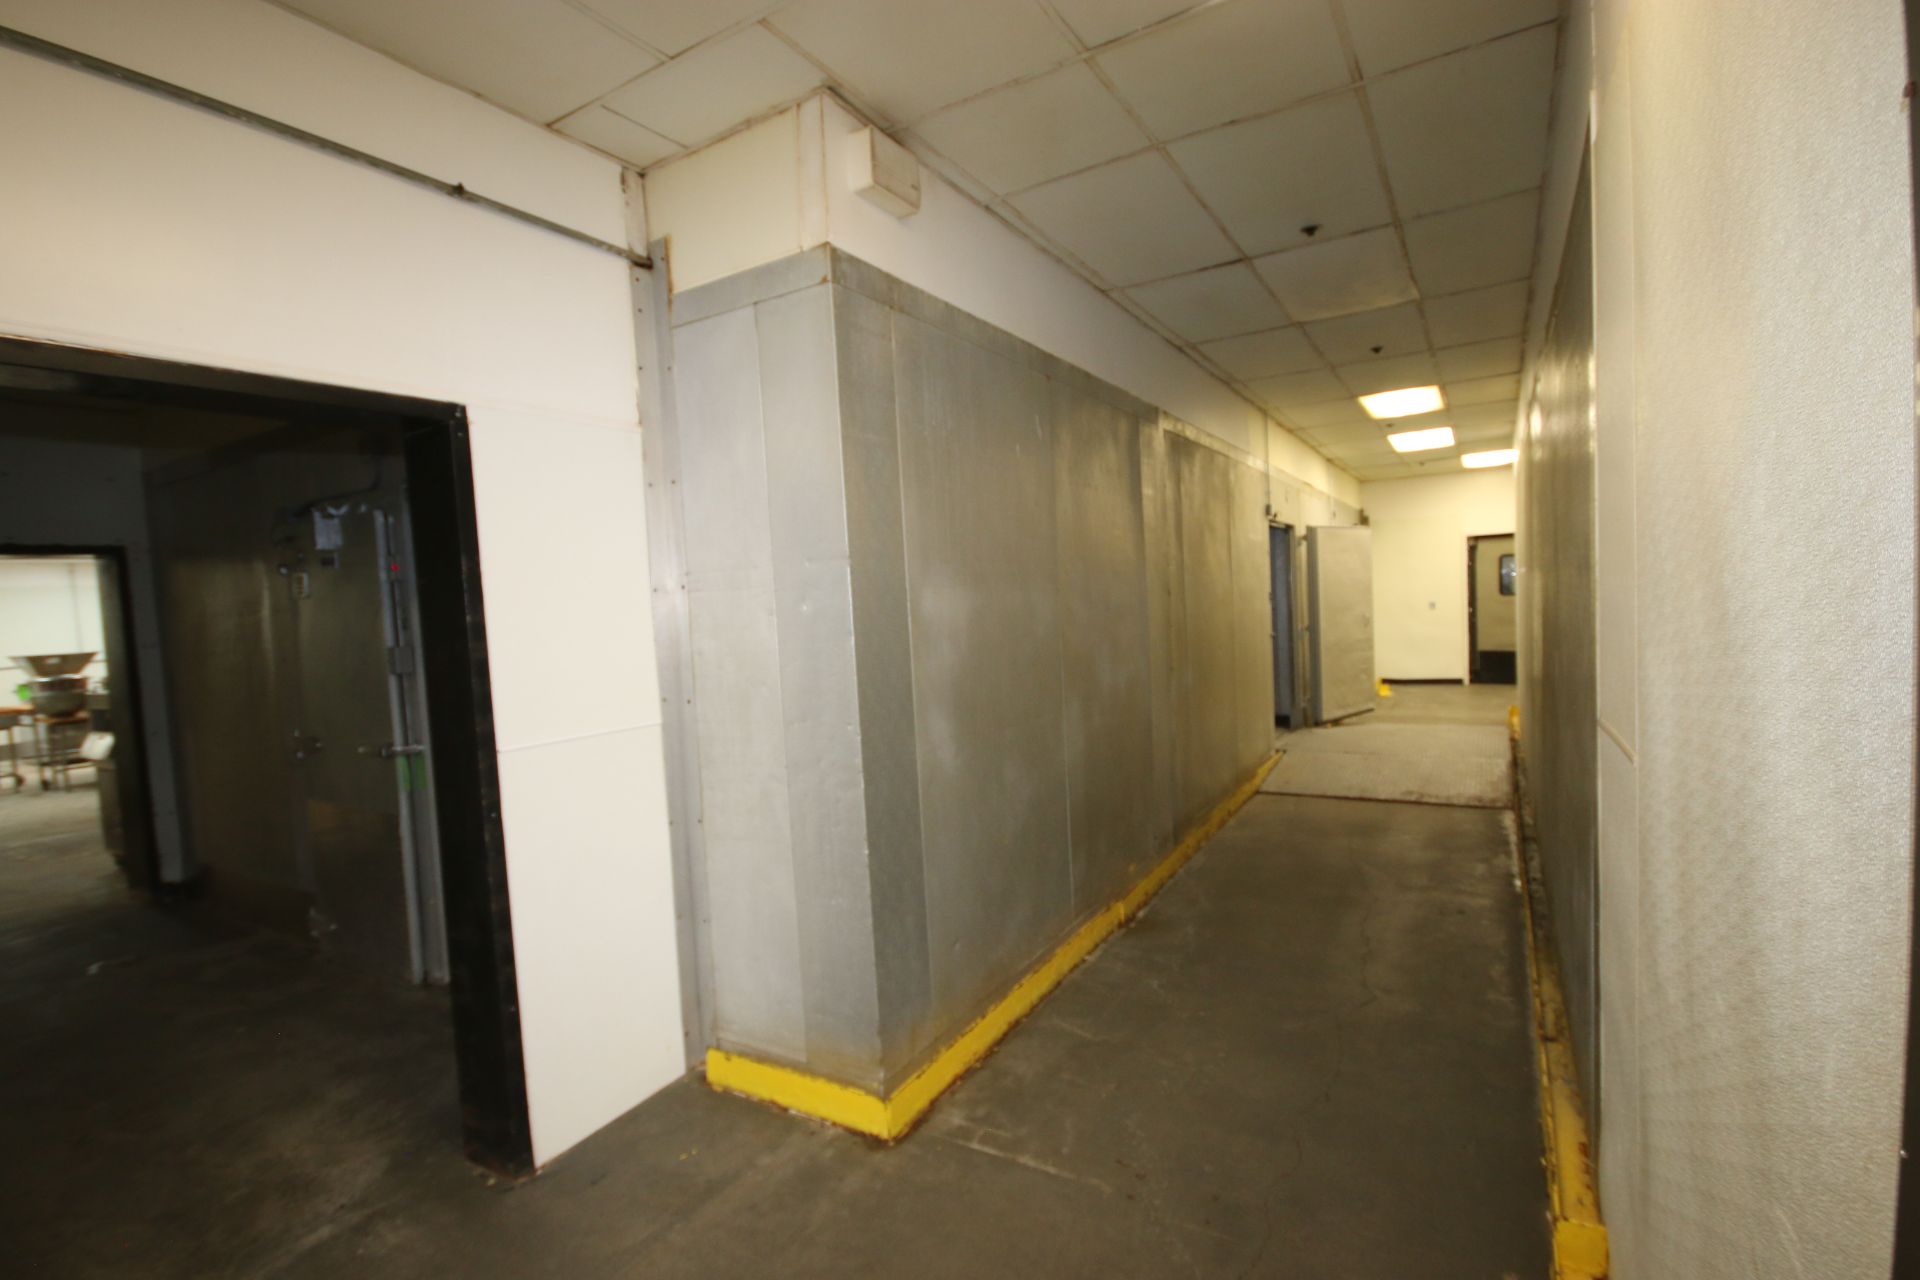 Brown 3-Door/3-Section Walk-In Cooler, with (4) Ceiling Mounted Blower Units, Overall Dims.: - Image 2 of 4